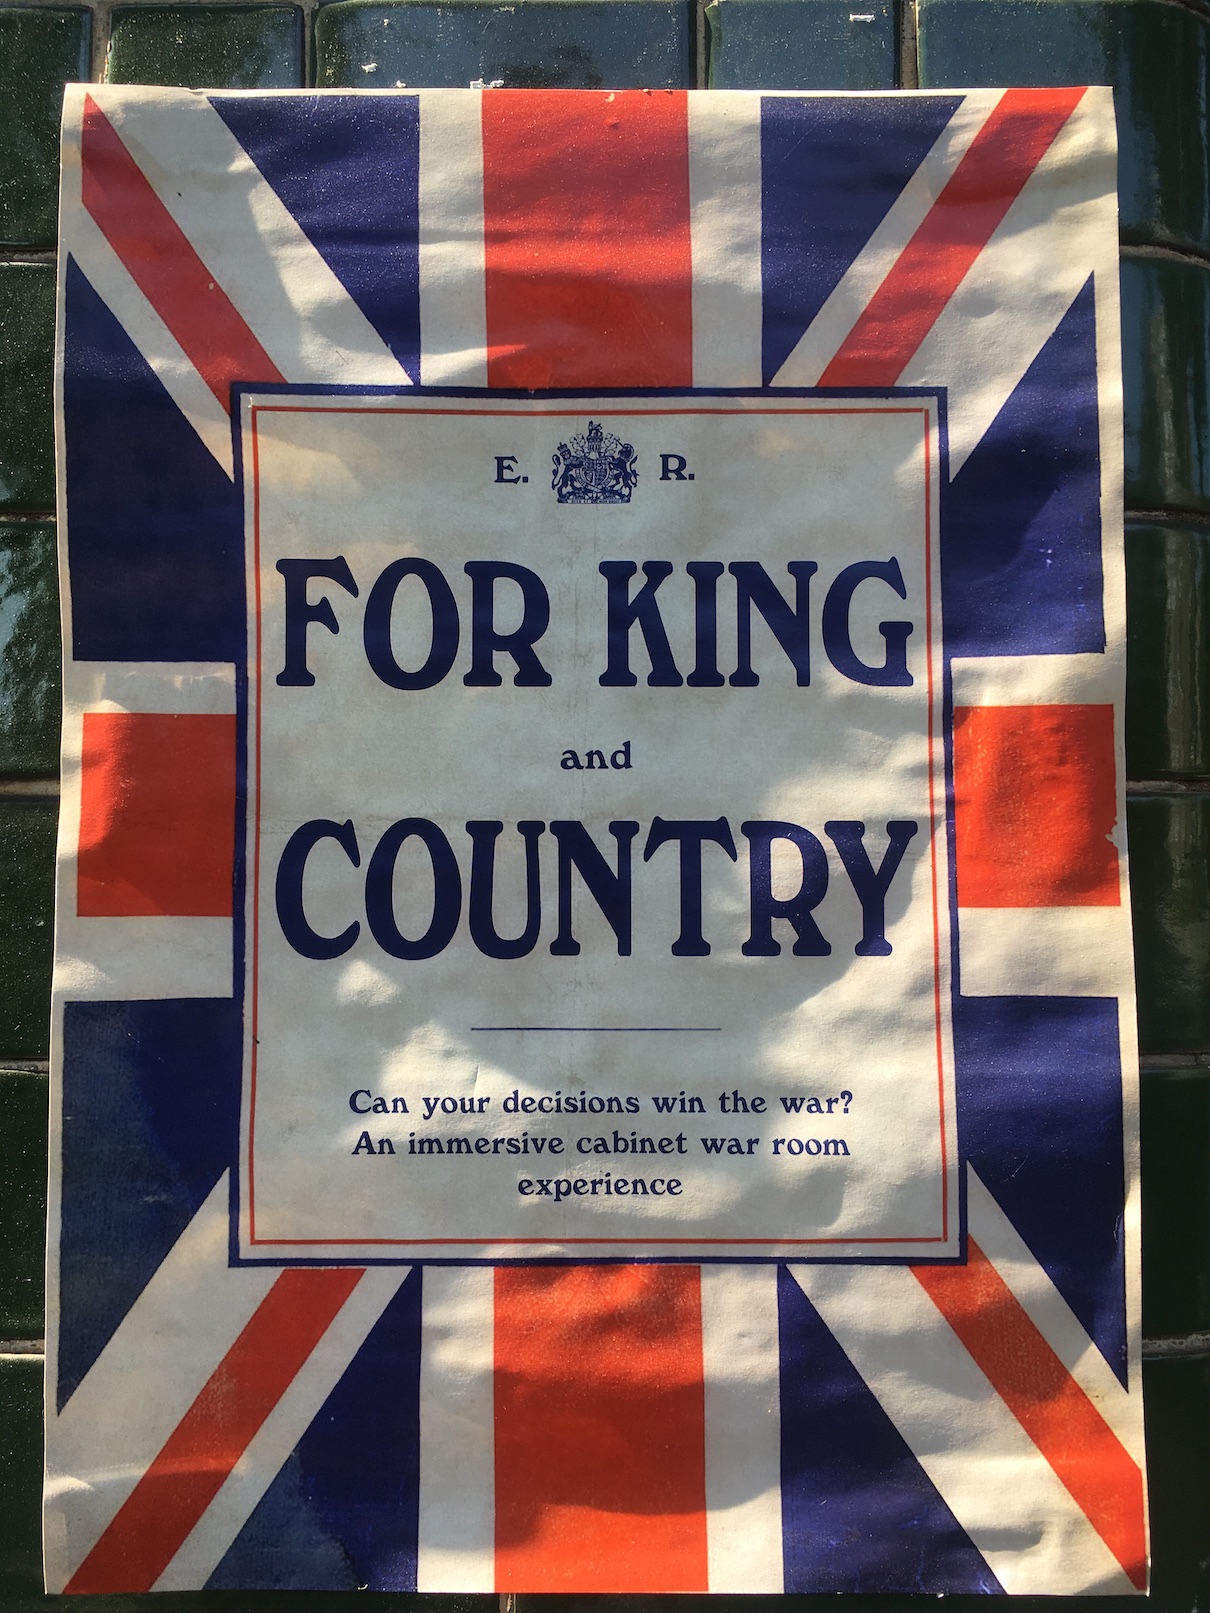 For King and Country poster.